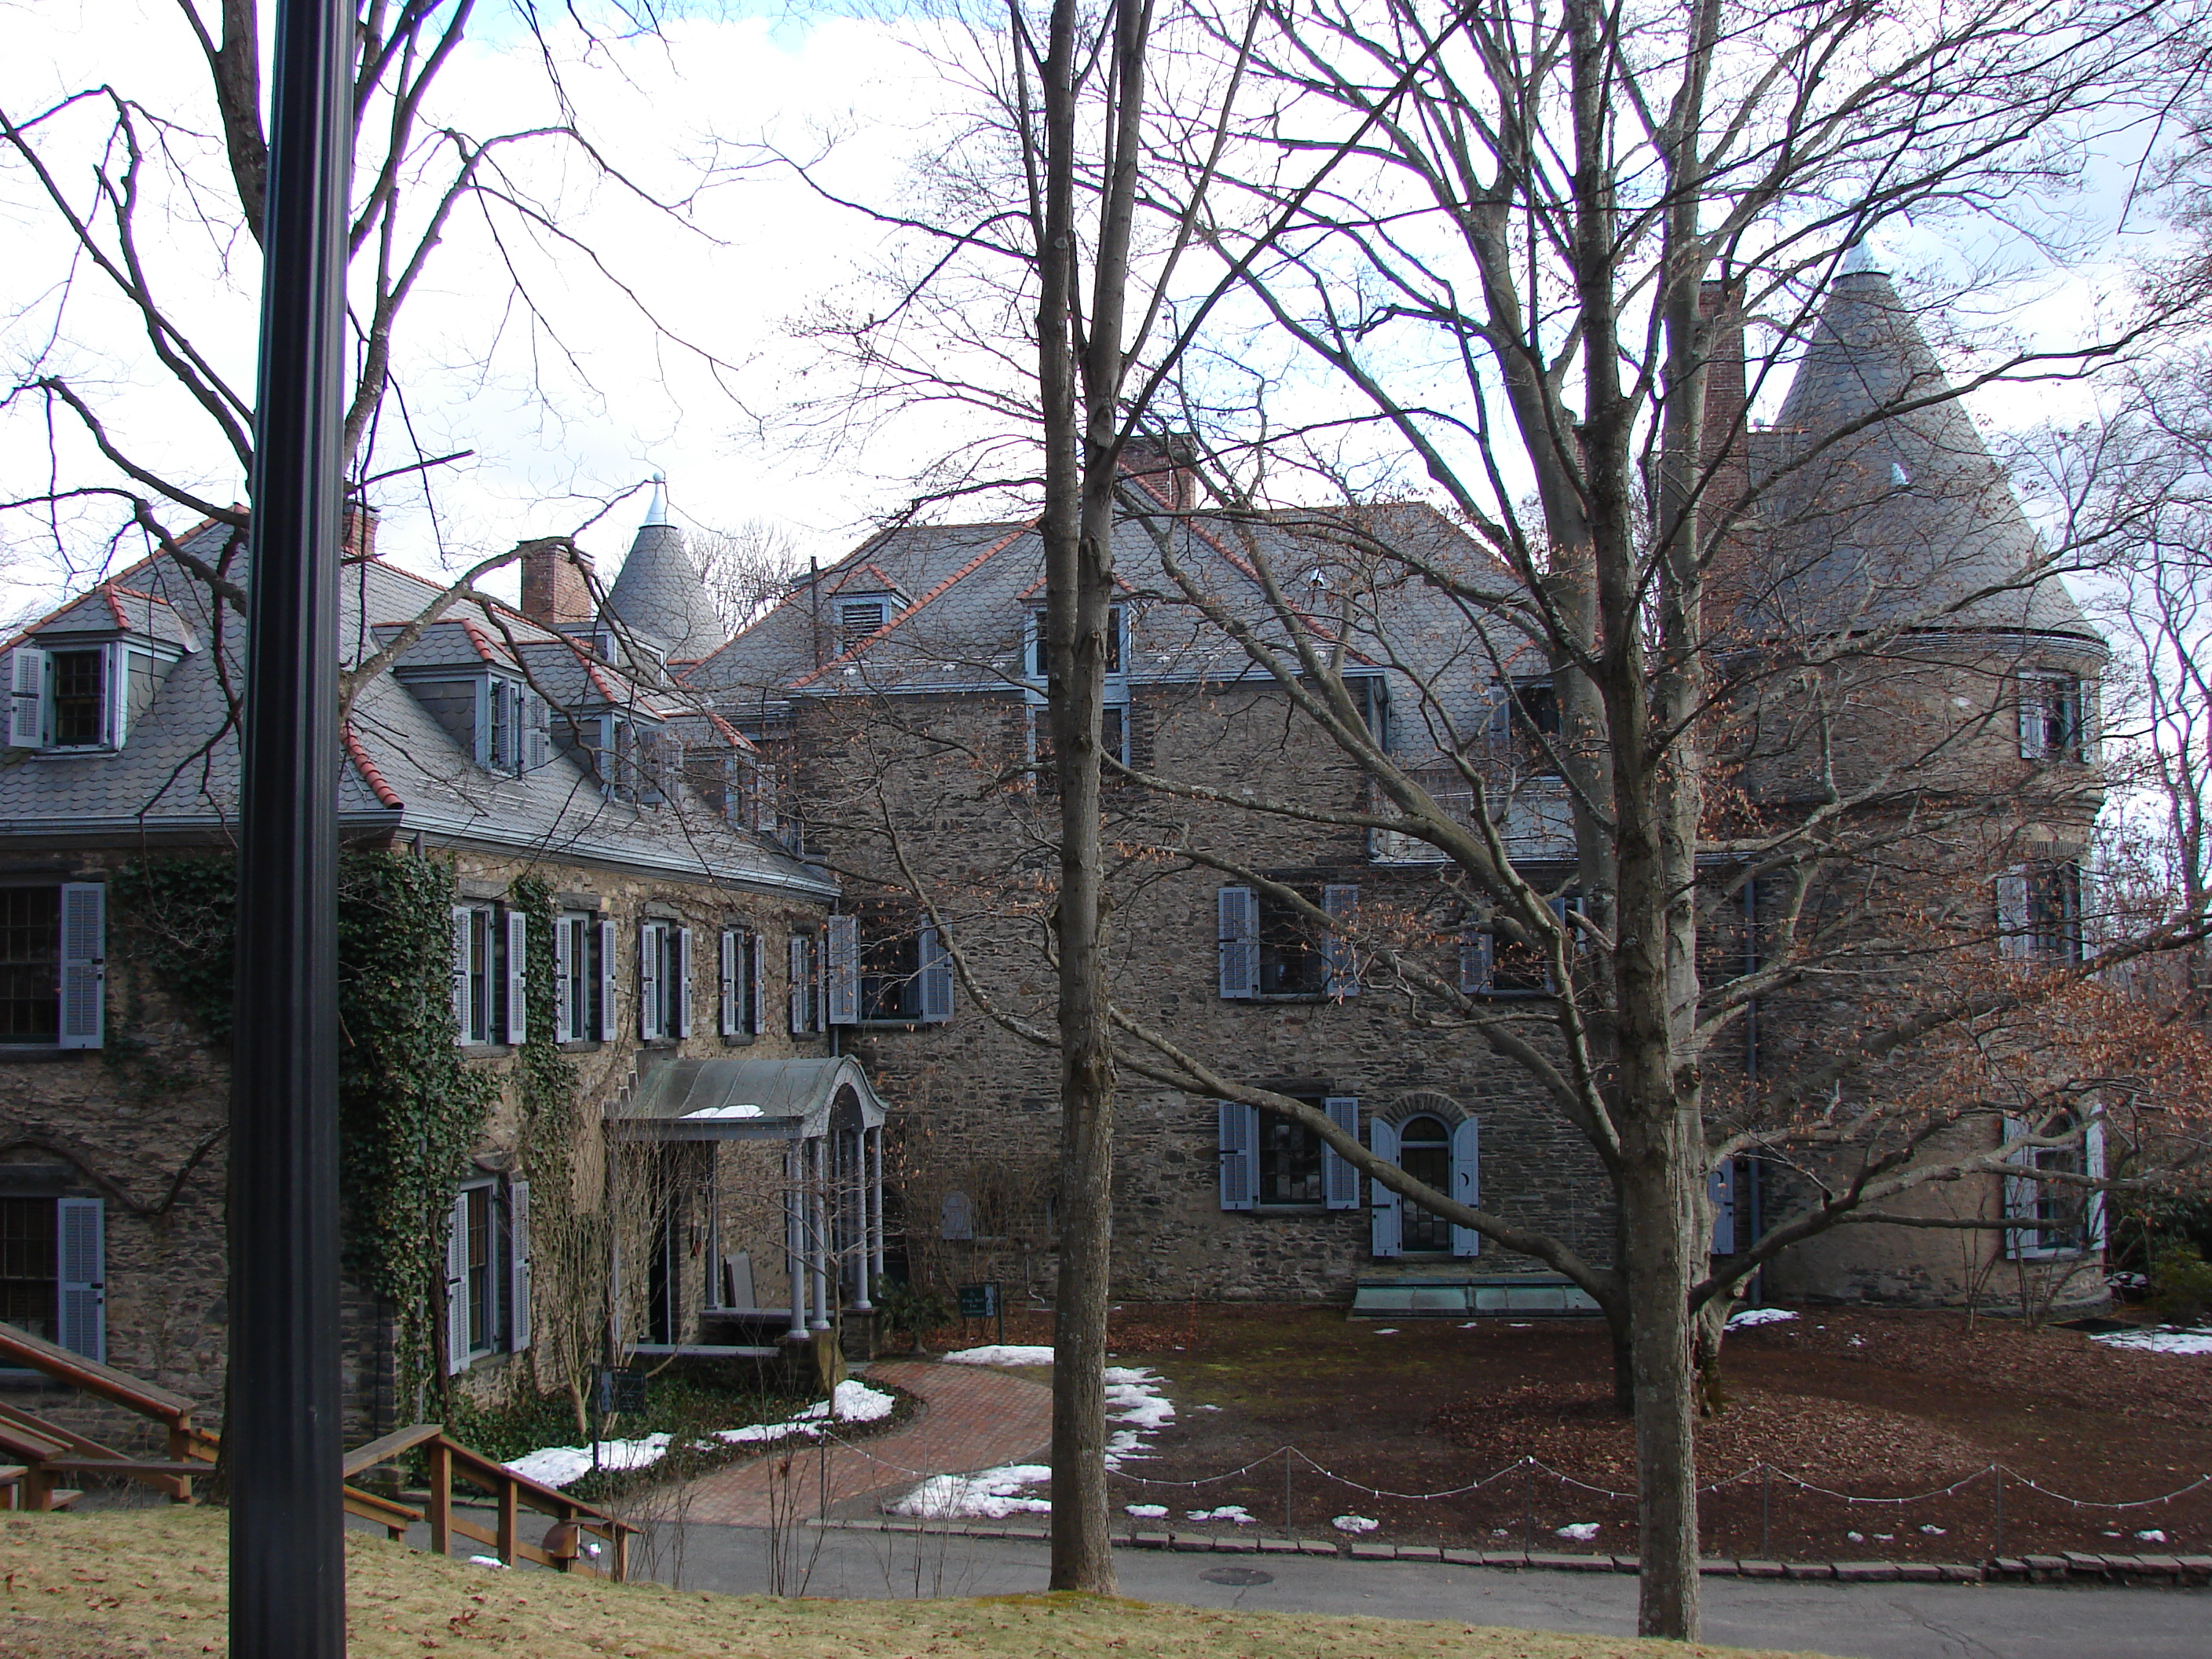 File:Grey Towers National Historic Site rear view.jpg - Wikimedia ...